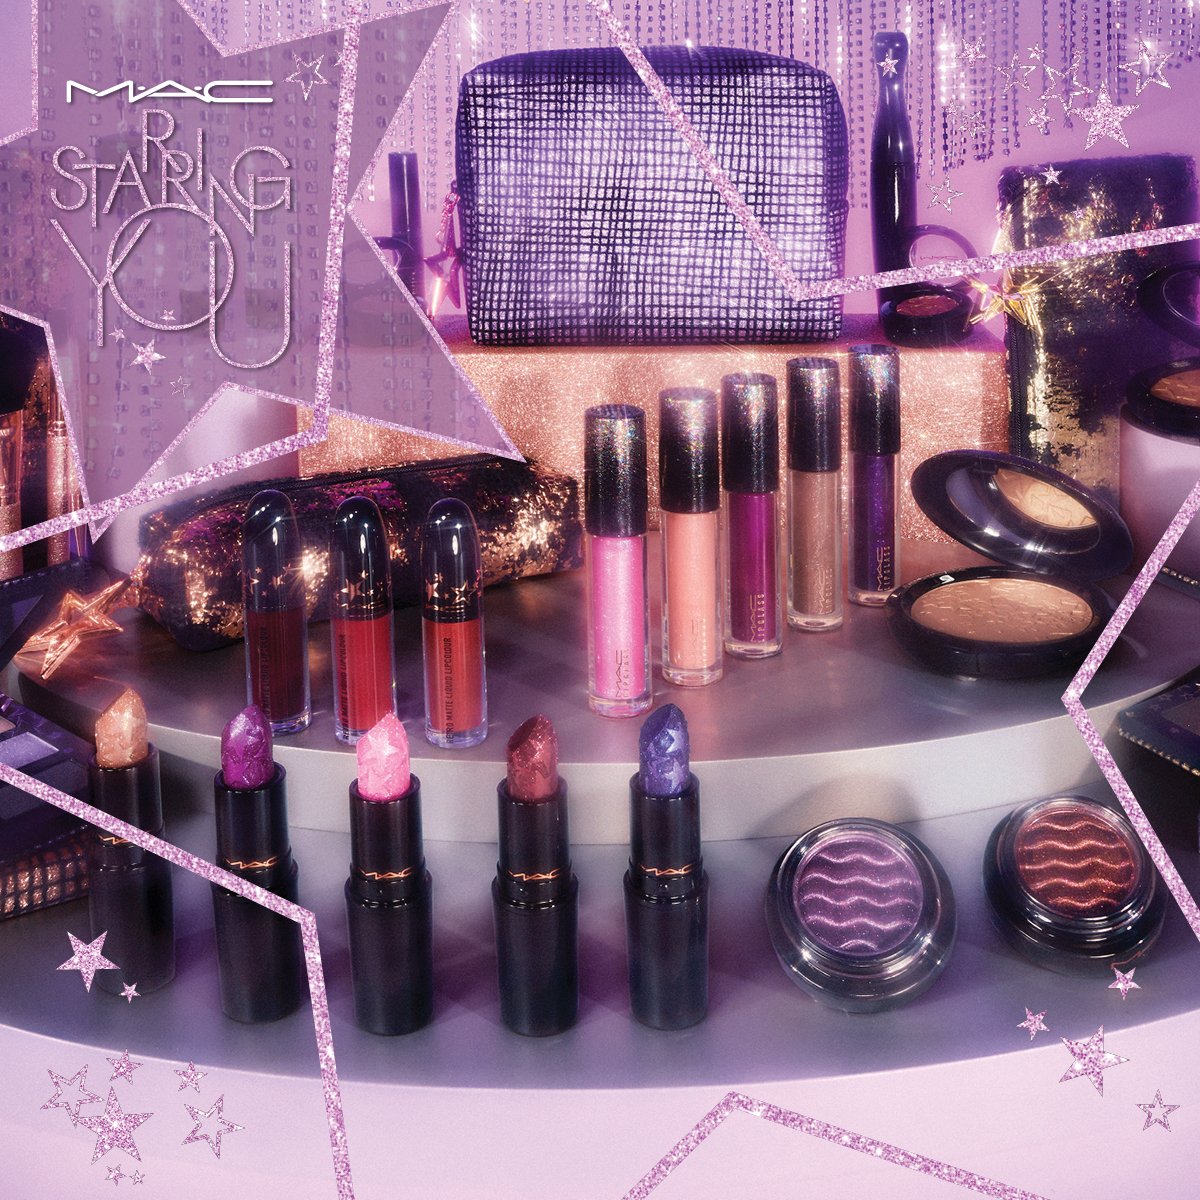 Dubai Duty on Twitter: "No bad side in this year's photos, with picture perfect coverage in every shade of MAC's Holiday Collection. #MACHolidayCollection #MakeUp #MACStarringYou #MACTREMEA #Cosmetics #Christmas